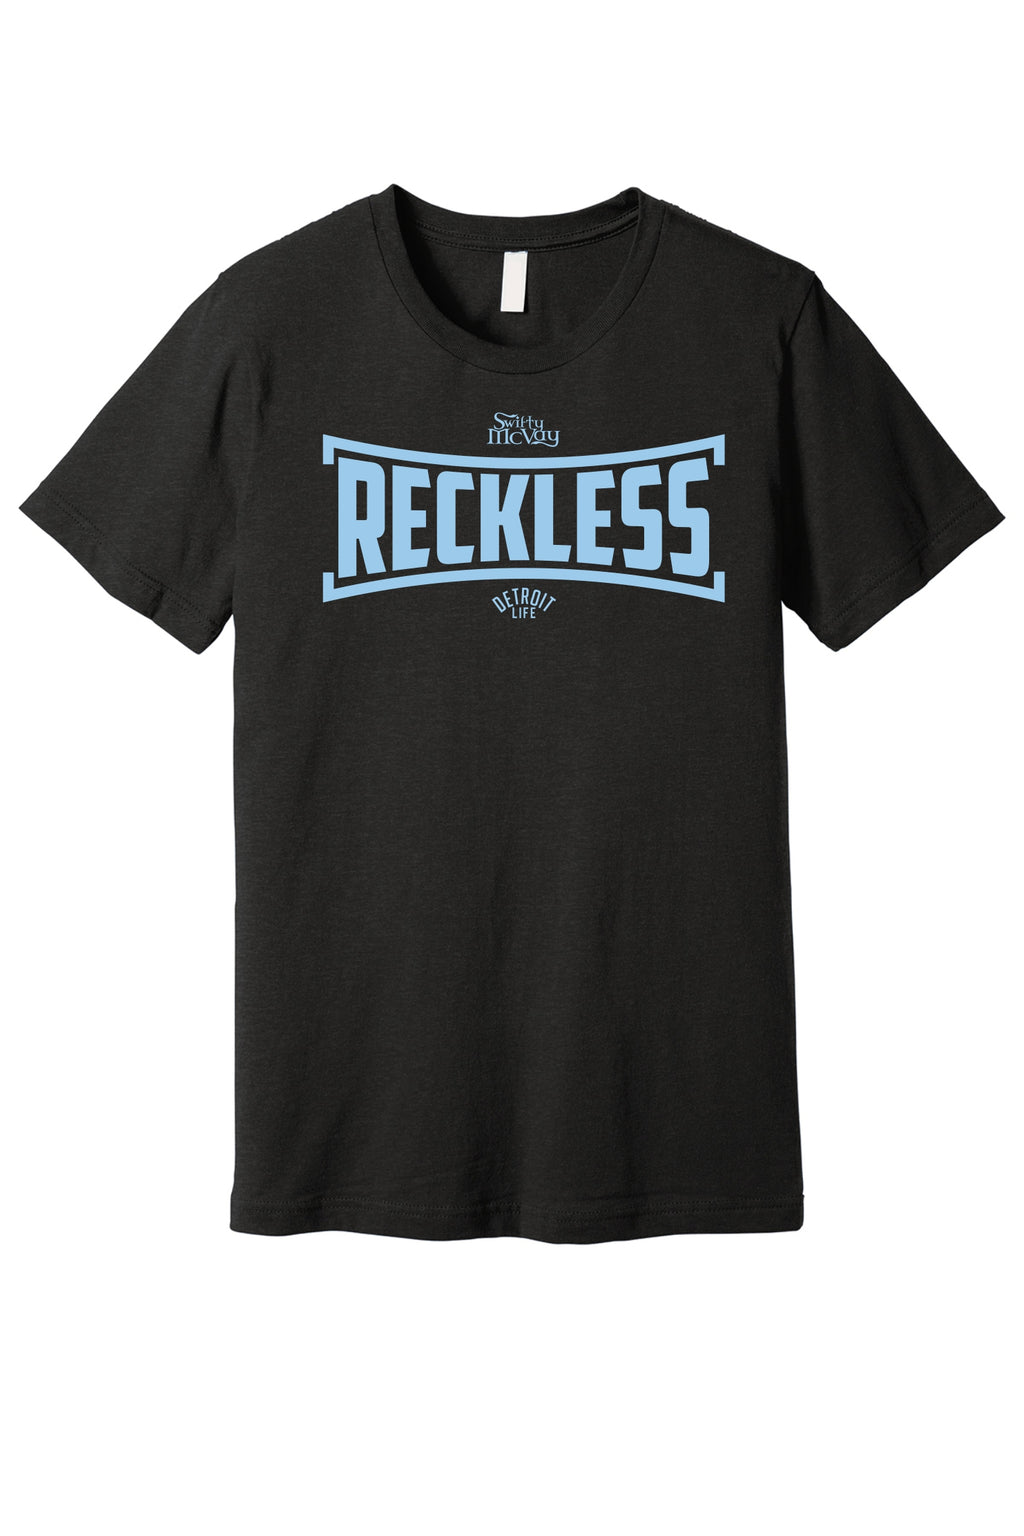 RECKLESS - SWIFTY MCVAY T SHIRT